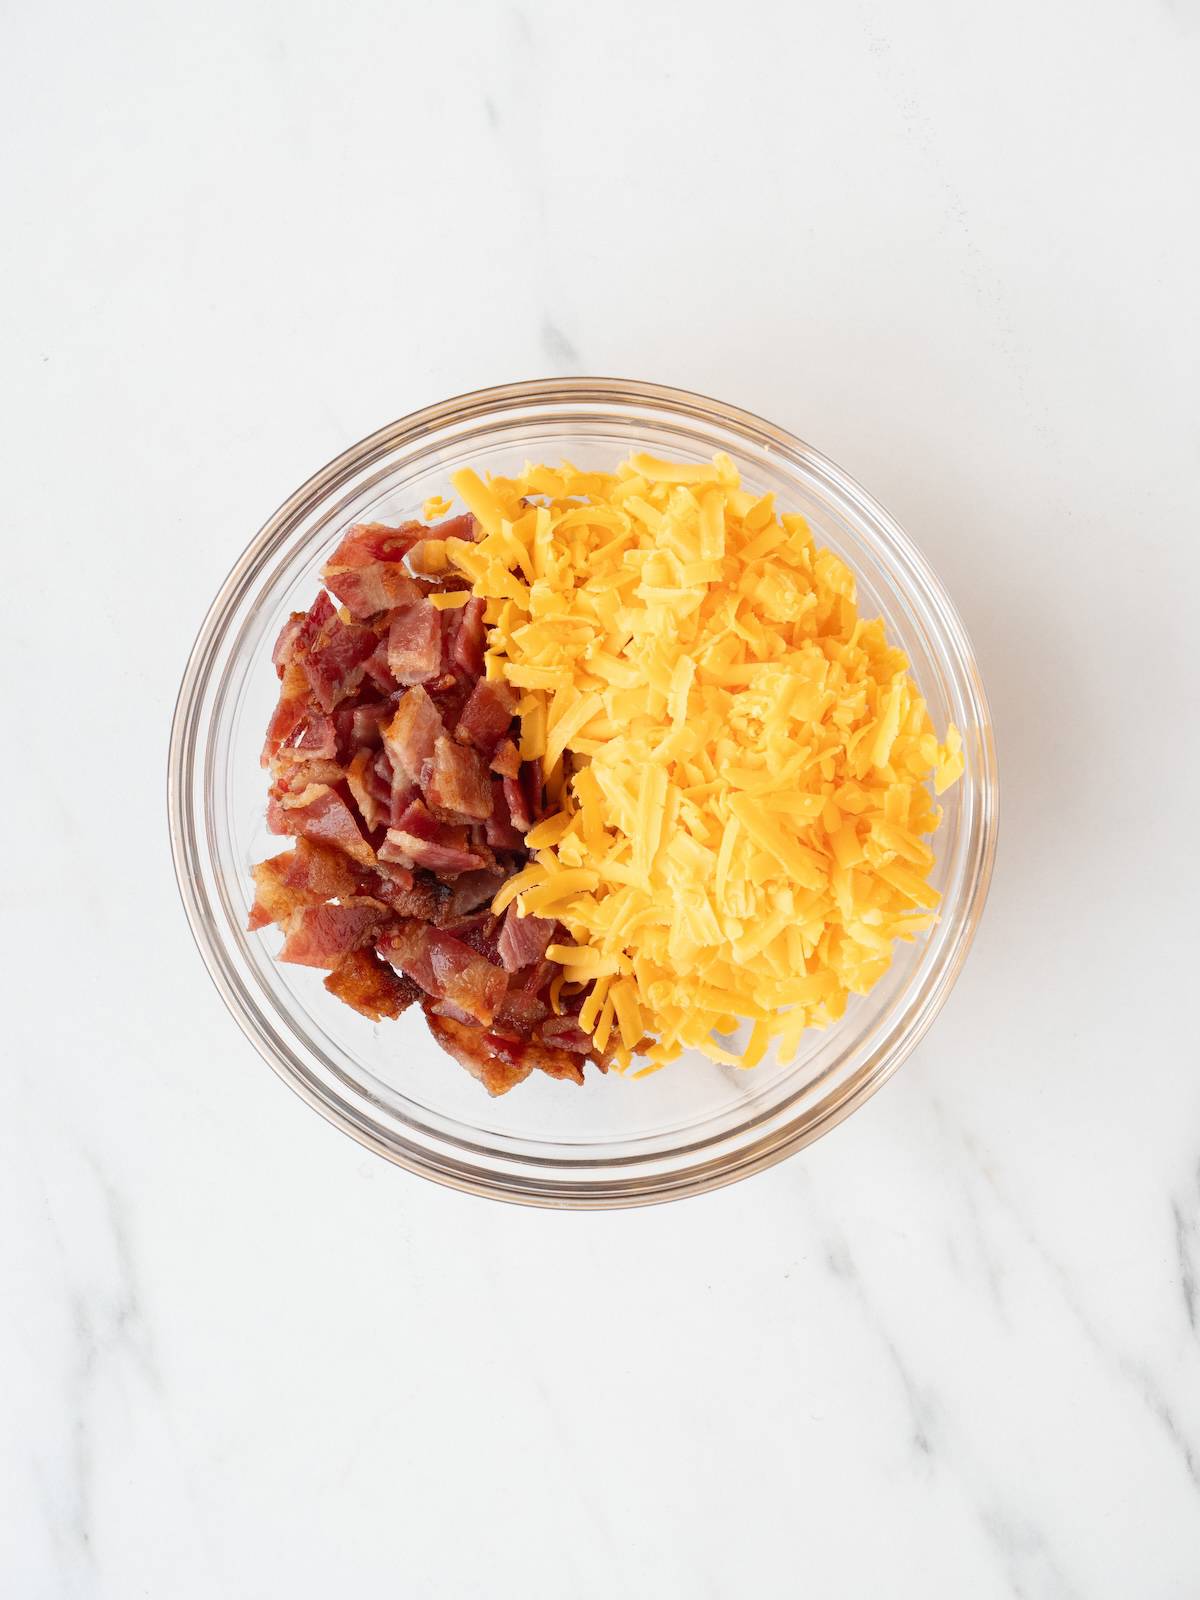 A glass mixing bowl with bacon broken into pieces and shredded cheddar cheese.